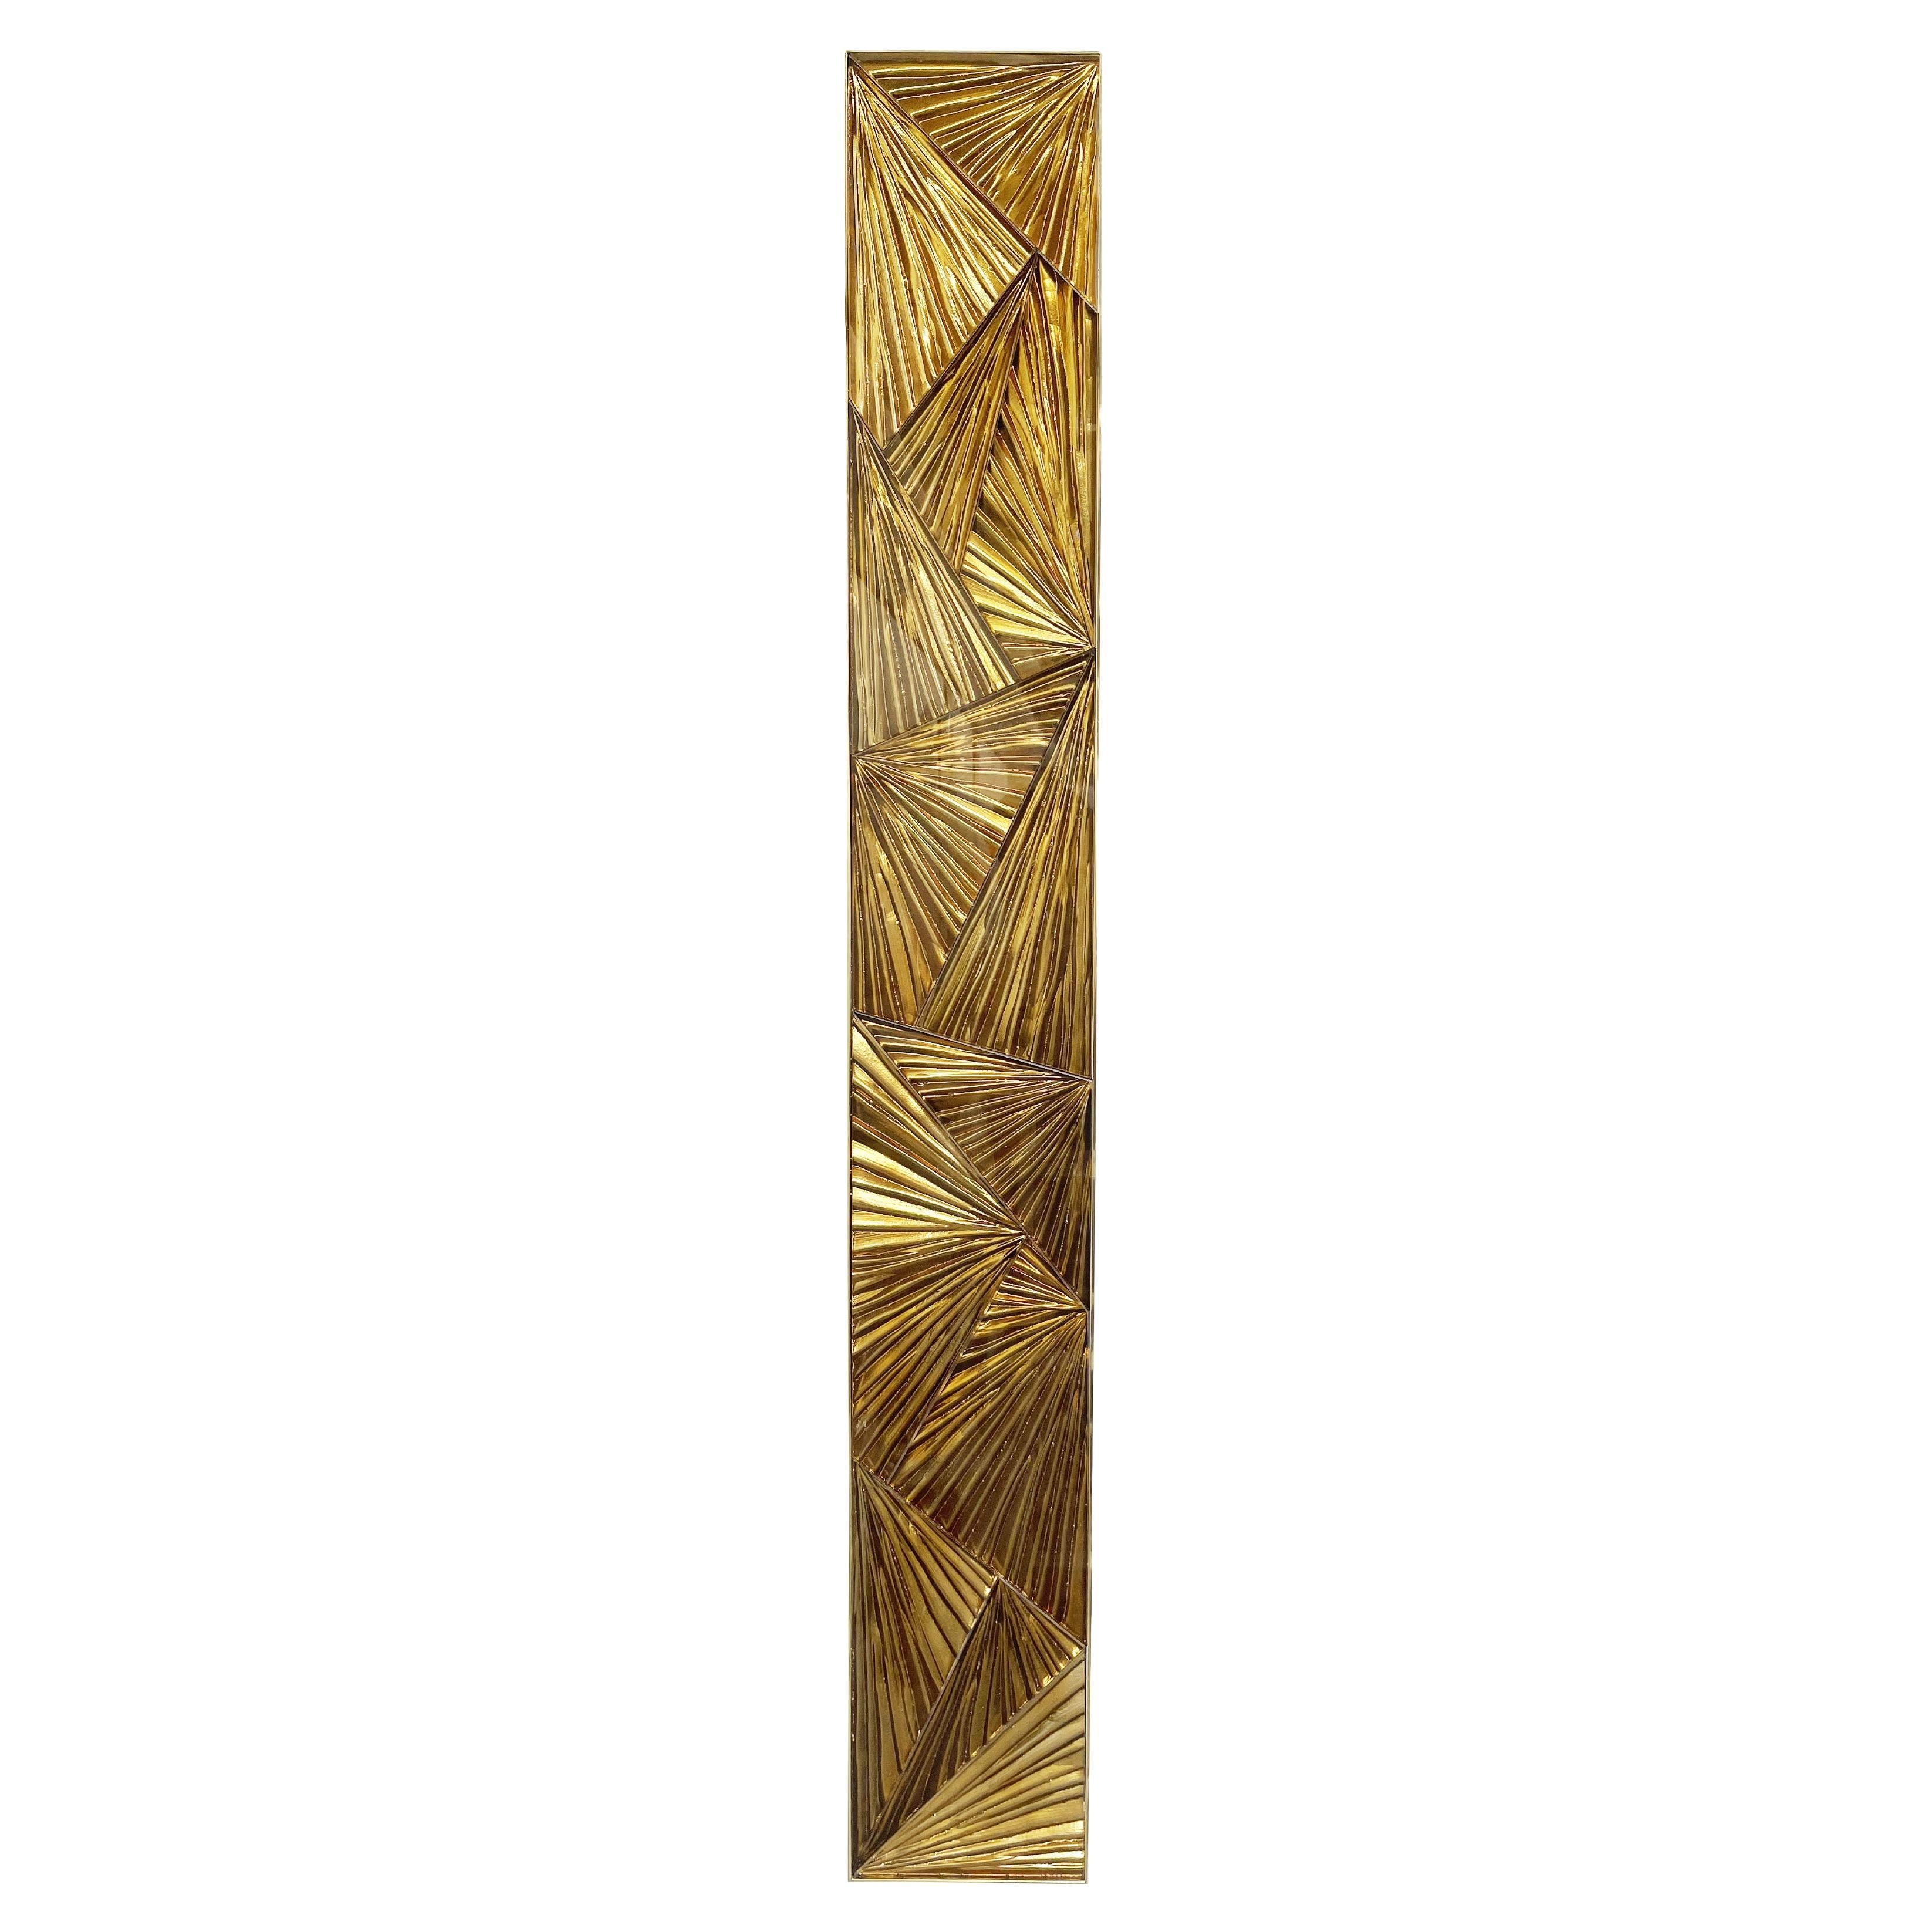 Contemporary Amber Wall Sconce Handcarved Glass, Brass and Gold by Ghirò Studio For Sale